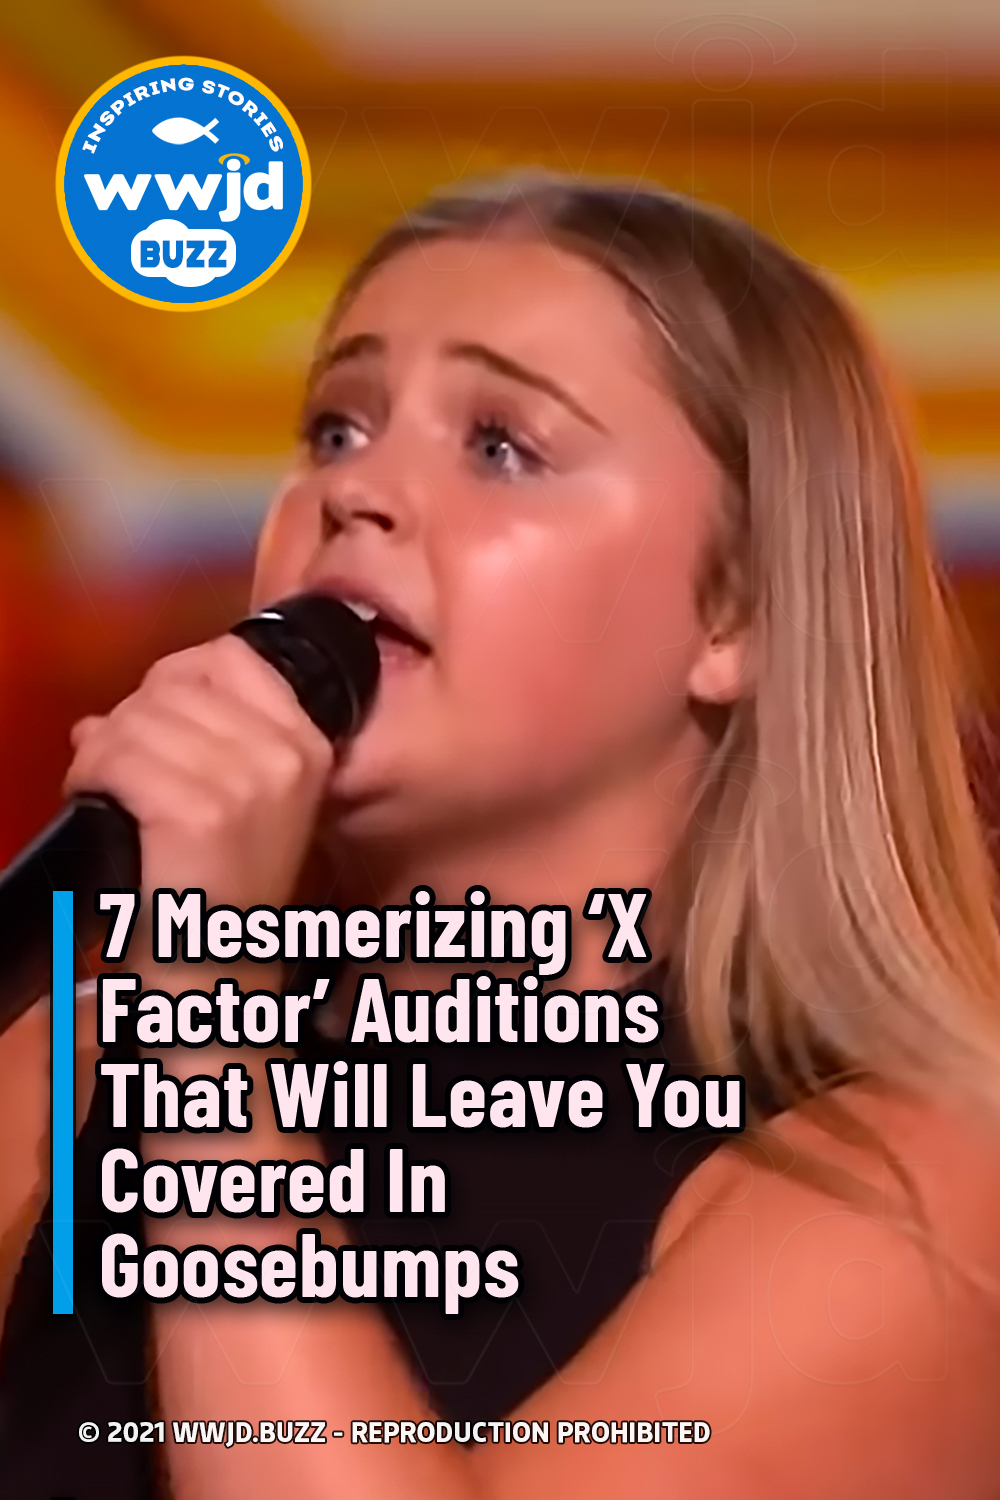 7 Mesmerizing \'X Factor\' Auditions That Will Leave You Covered In Goosebumps